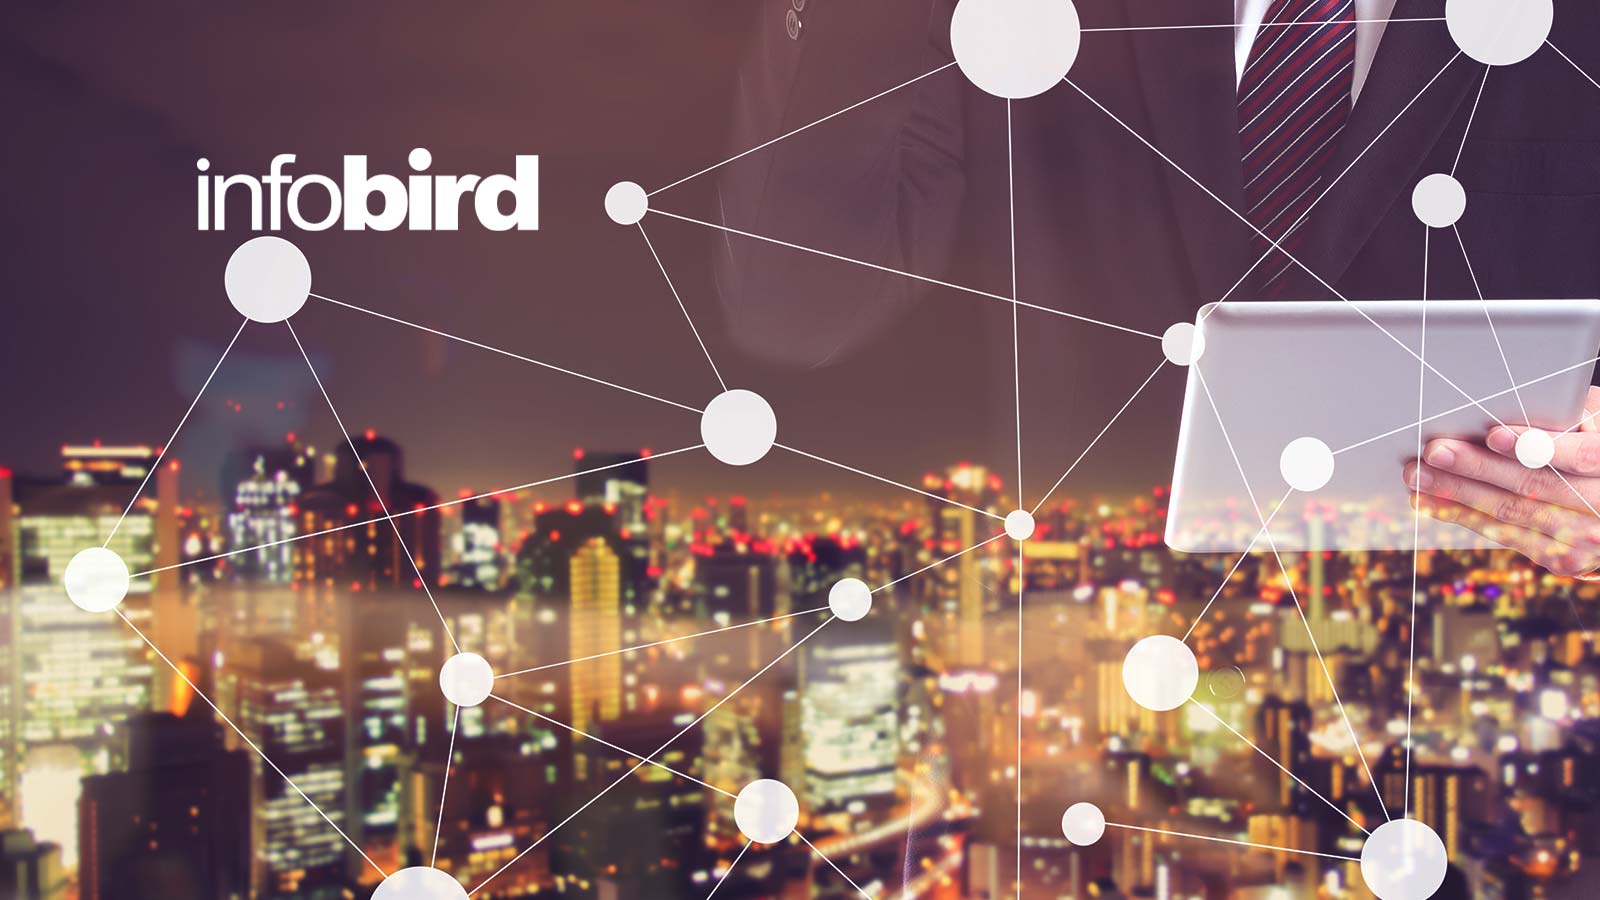 Infobird Signs Contract with Subsidiary of Nippi Japan for Digital Marketing Solutions